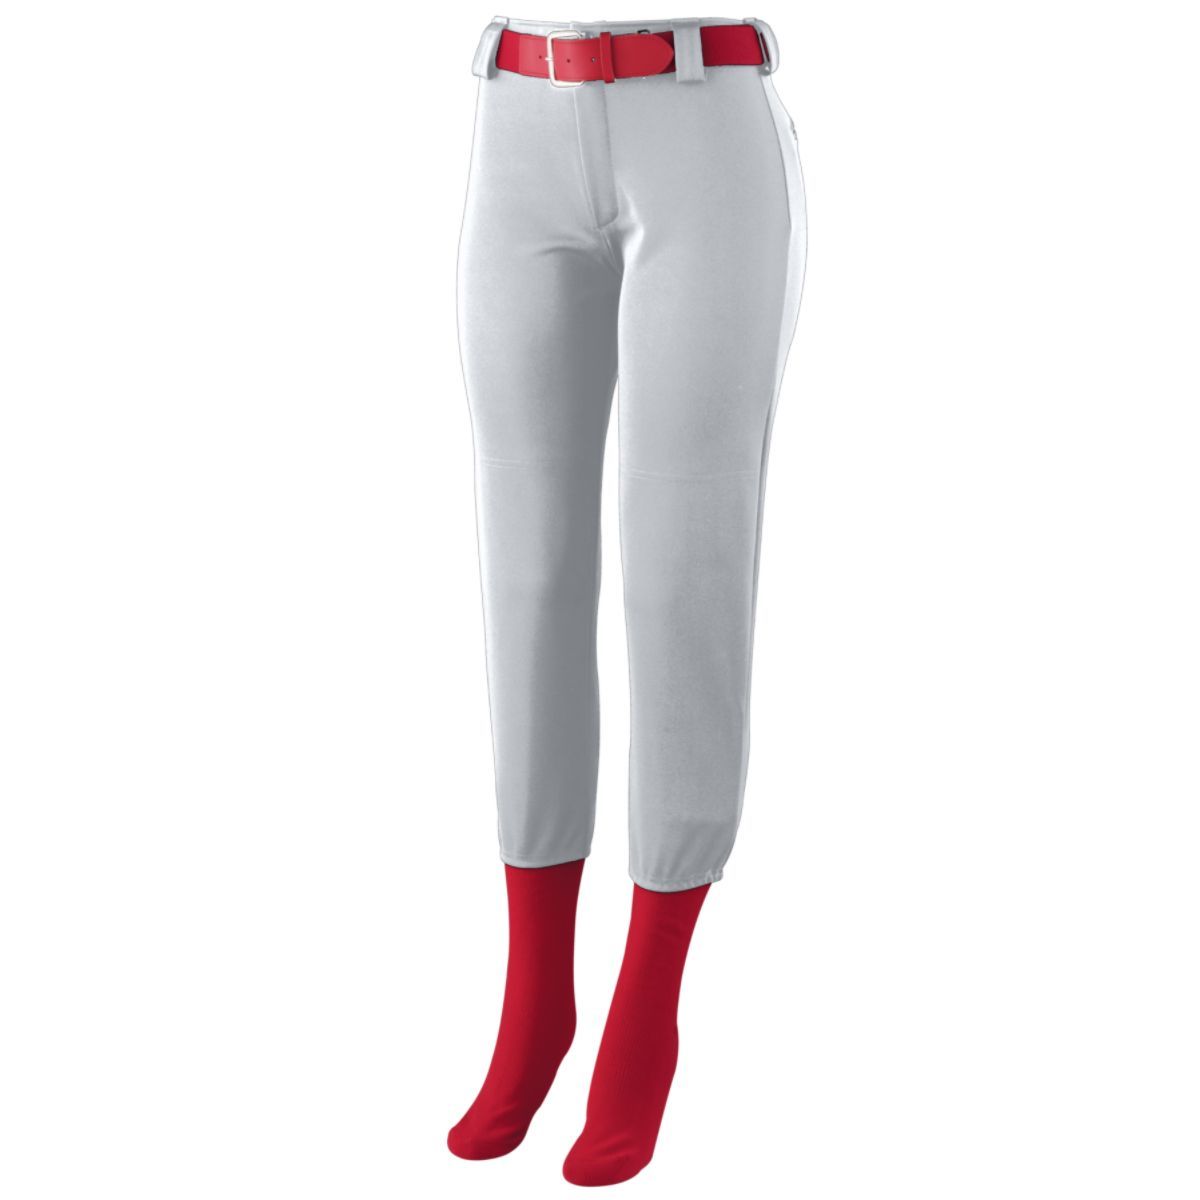 Augusta Sportswear Girls Low Rise Homerun Pant in Silver Grey  -Part of the Girls, Pants, Augusta-Products, Softball, Girls-Pants product lines at KanaleyCreations.com